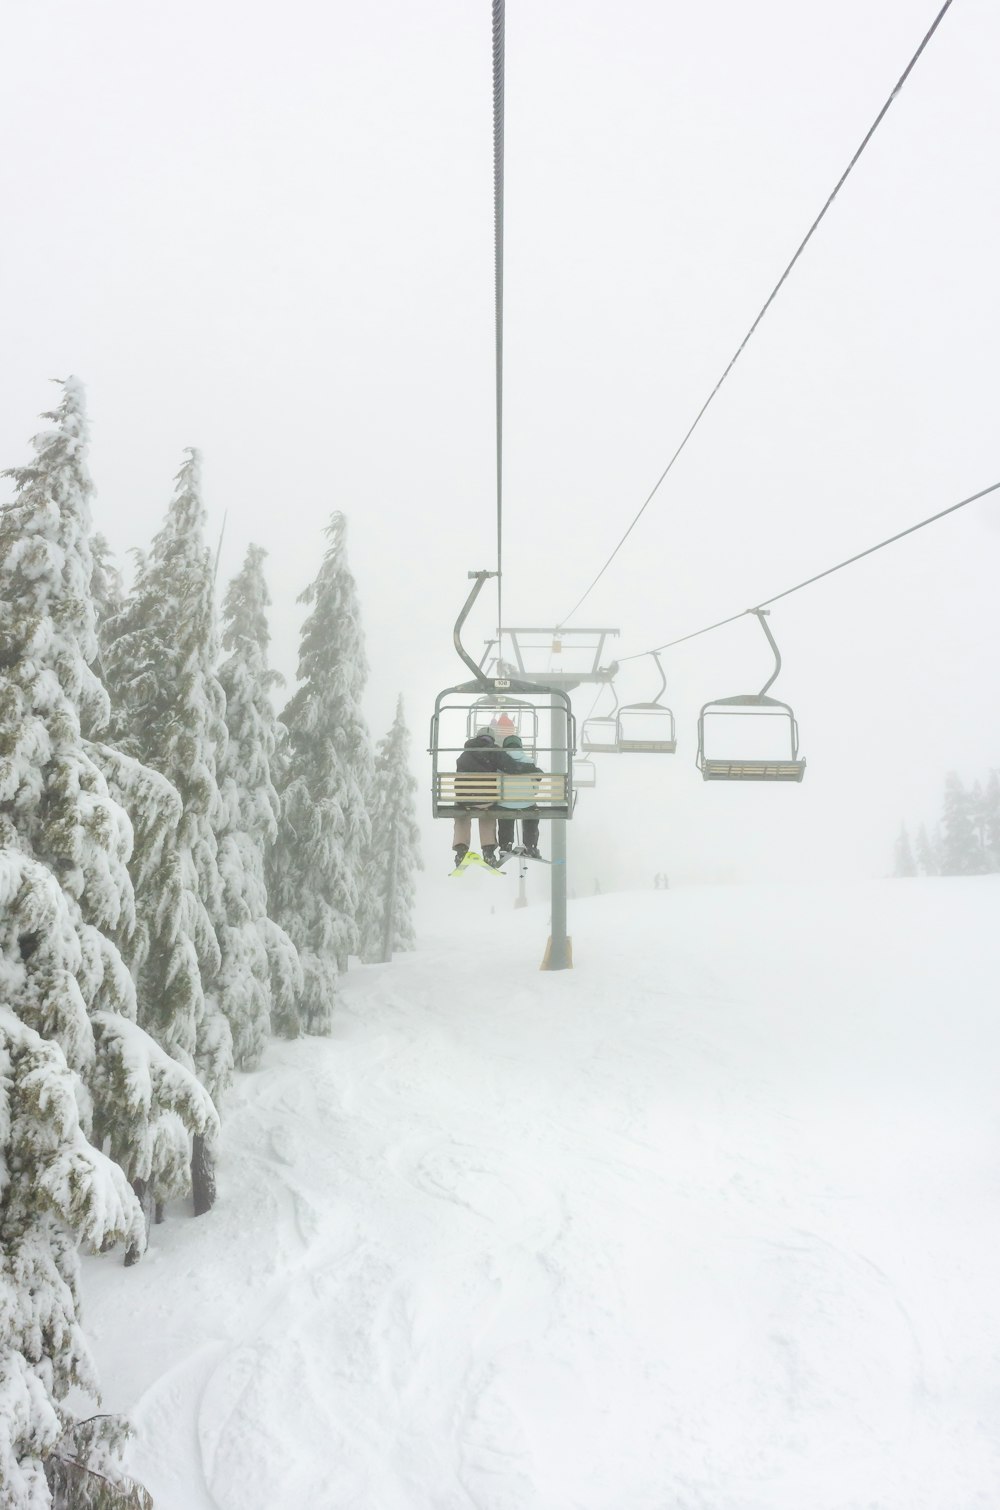 a person riding a ski lift on a snowy day